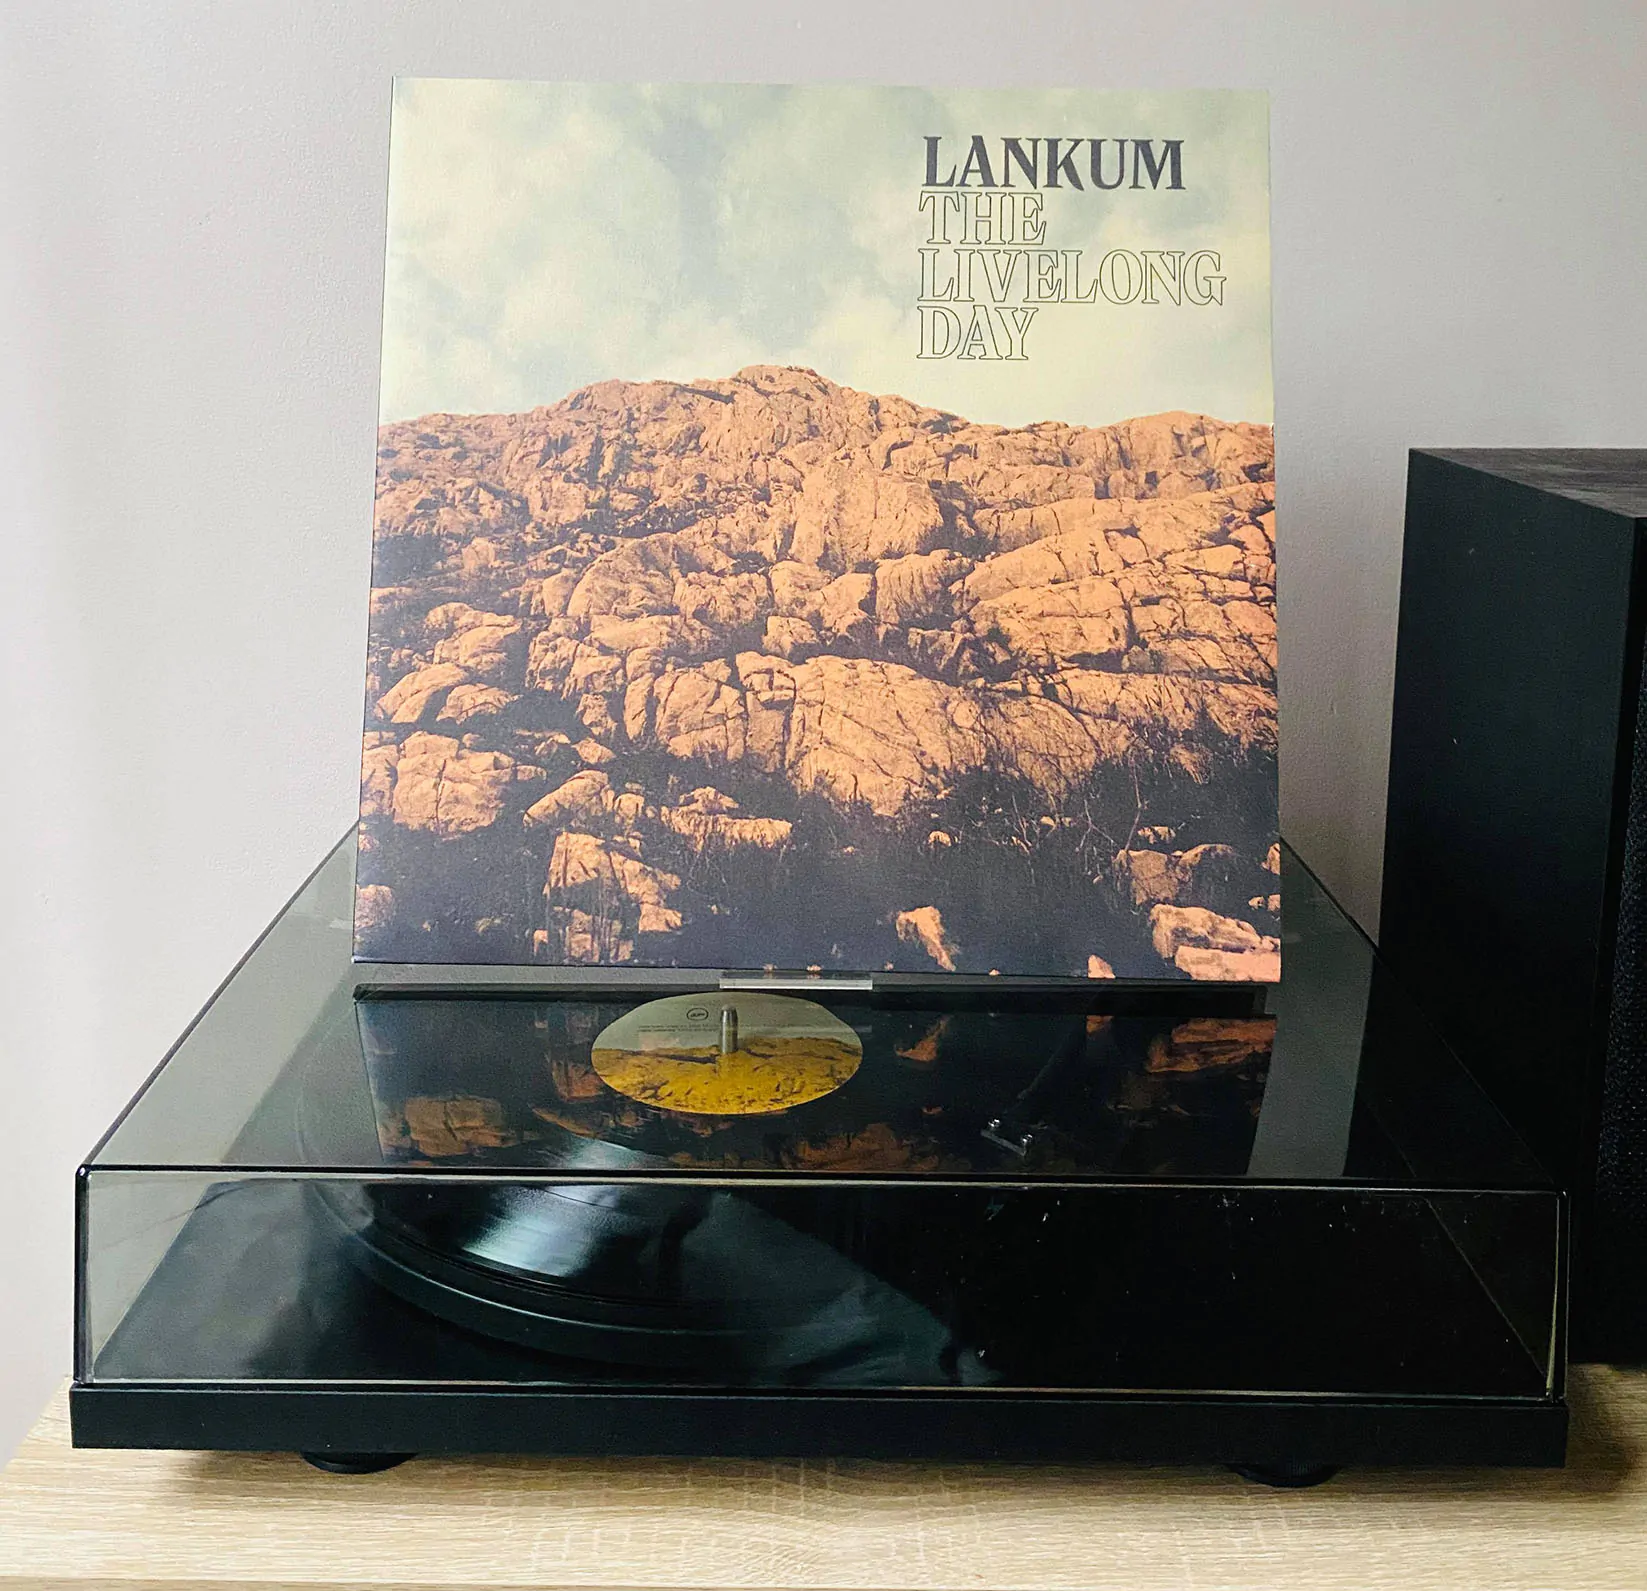 ON THE TURNTABLE: Lankum – The Livelong Day